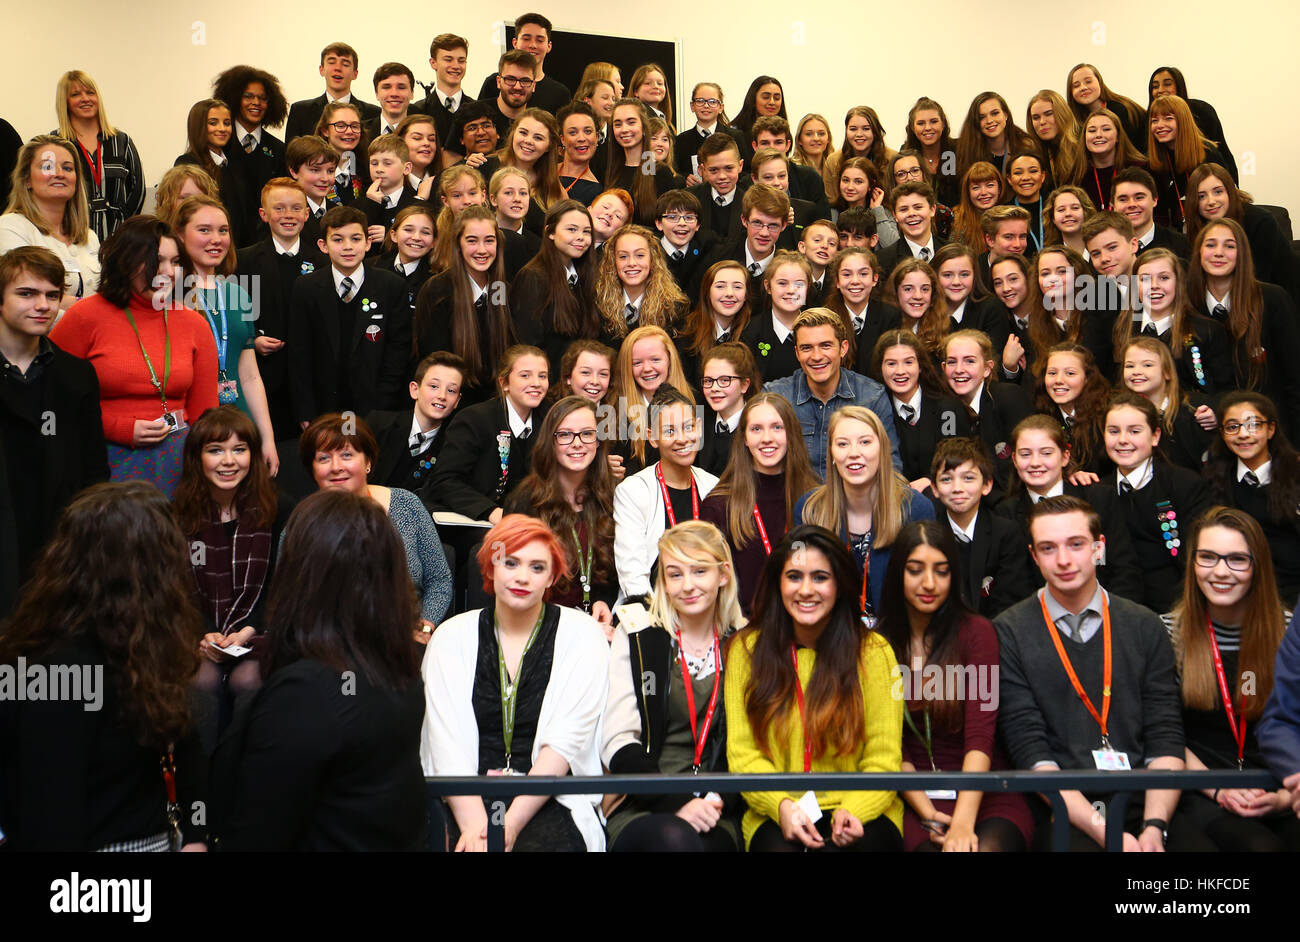 Actor Orlando Bloom meets pupils whilst attending the Laurus Trust launch held at Cheadle Hulme High School, Cheadle Hulme, Cheadle. The Trust has co-created its own Curriculum with Patsy Rodenburg, and two of her former pupils - Orlando Bloom and Paapa Essiedu - who are helping run workshops along with the Royal Shakespeare Company - showcasing the ethos and type of work that will be embedded in Laurus Trust schools. Stock Photo